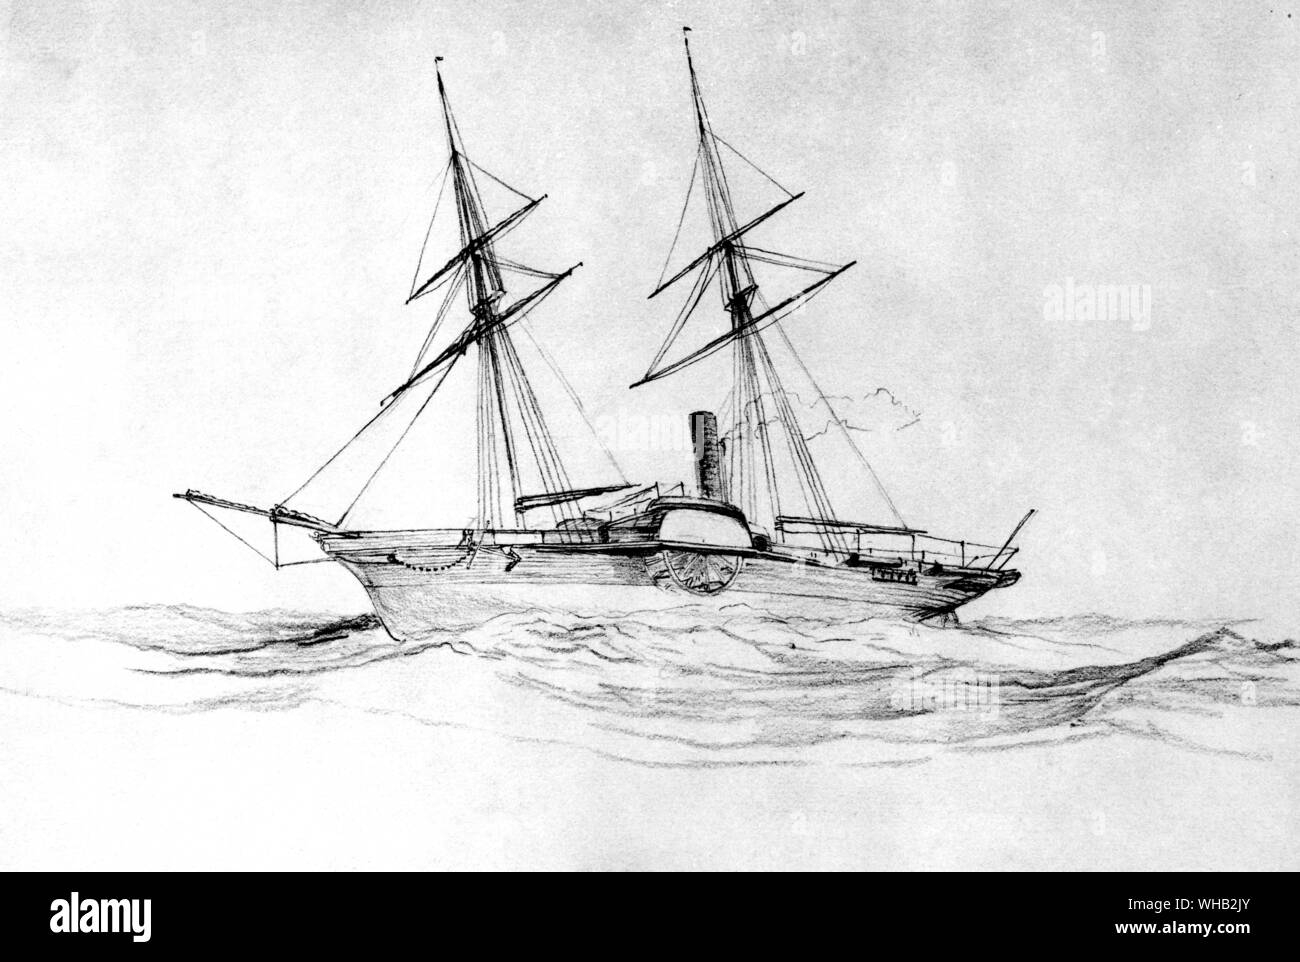 Thomas Baines pencil drawing. Royal Geographical Society. Signed - HMS Hermes in company with the Pearl (Pease) off the Delta of the Zambezi 3pm 15th May 1848 - T. Baines. Stock Photo